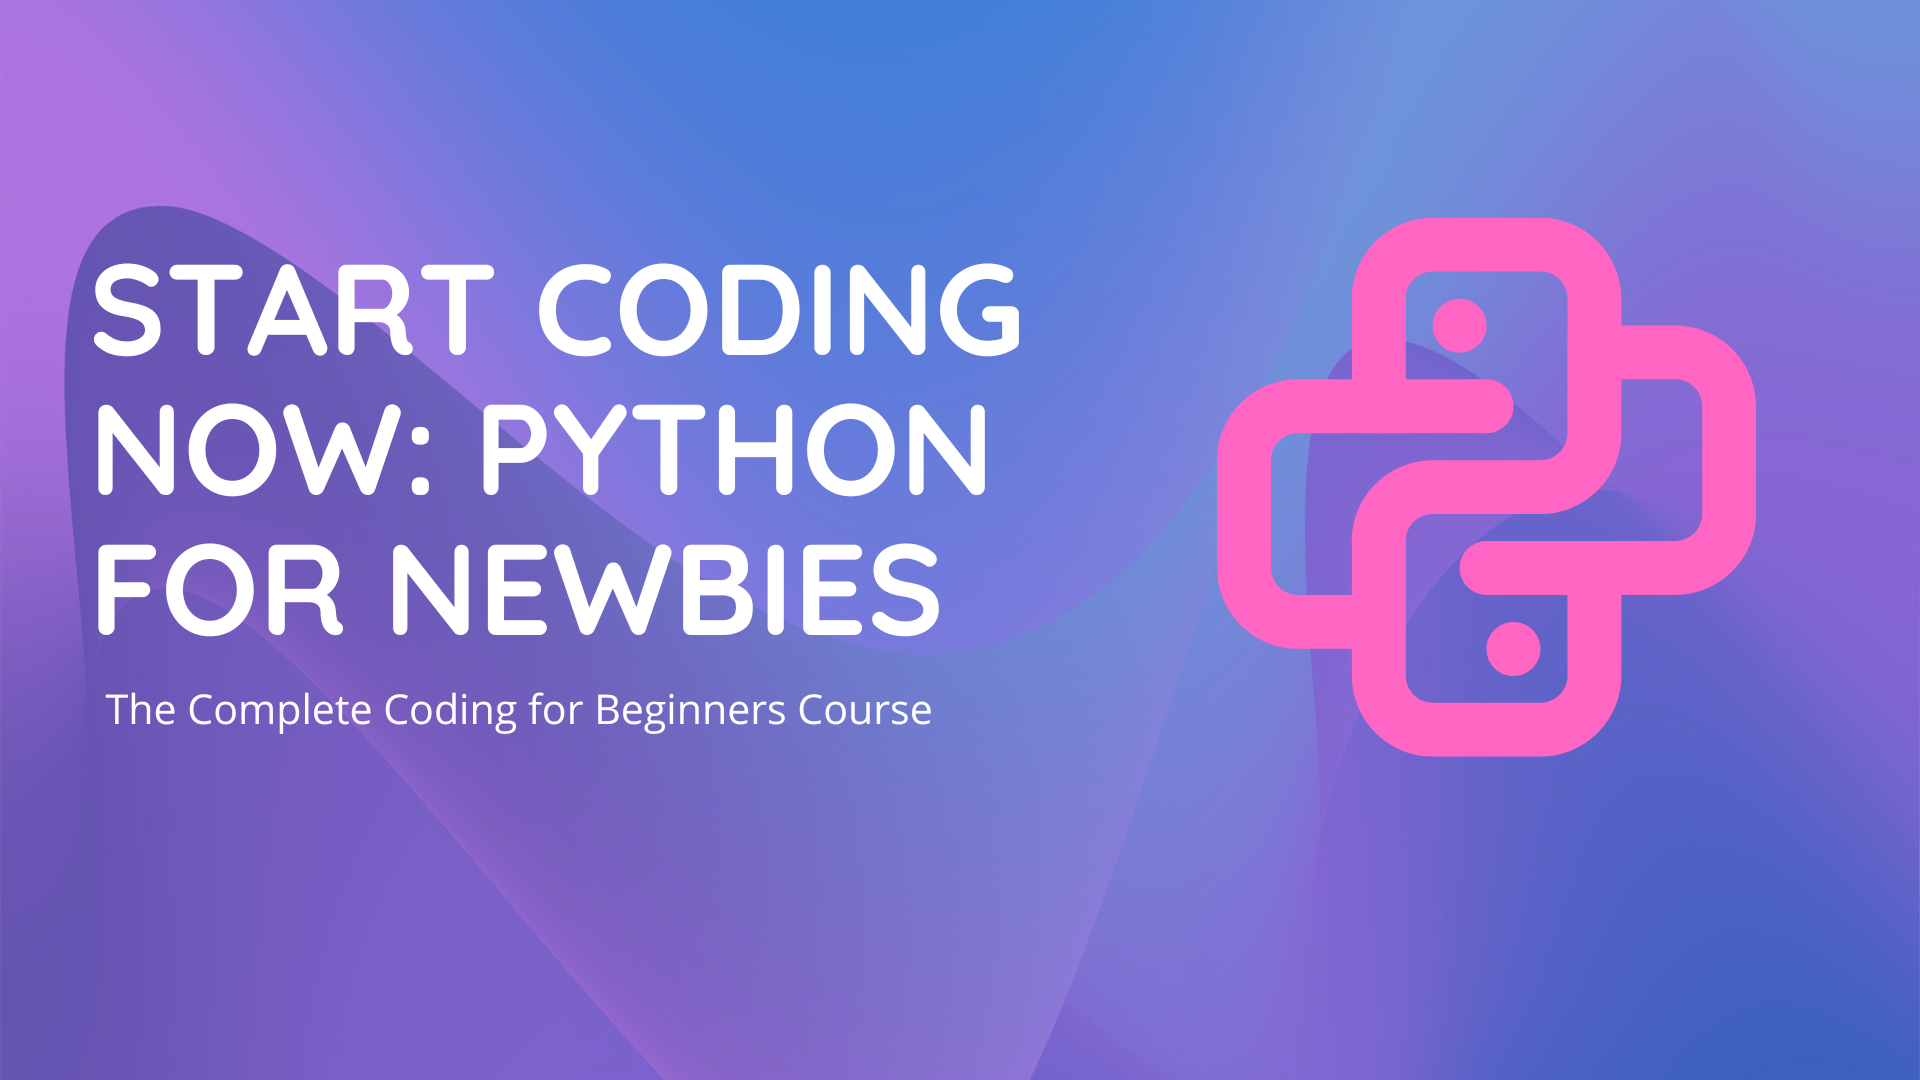 Start Coding Now: Python for Newbies